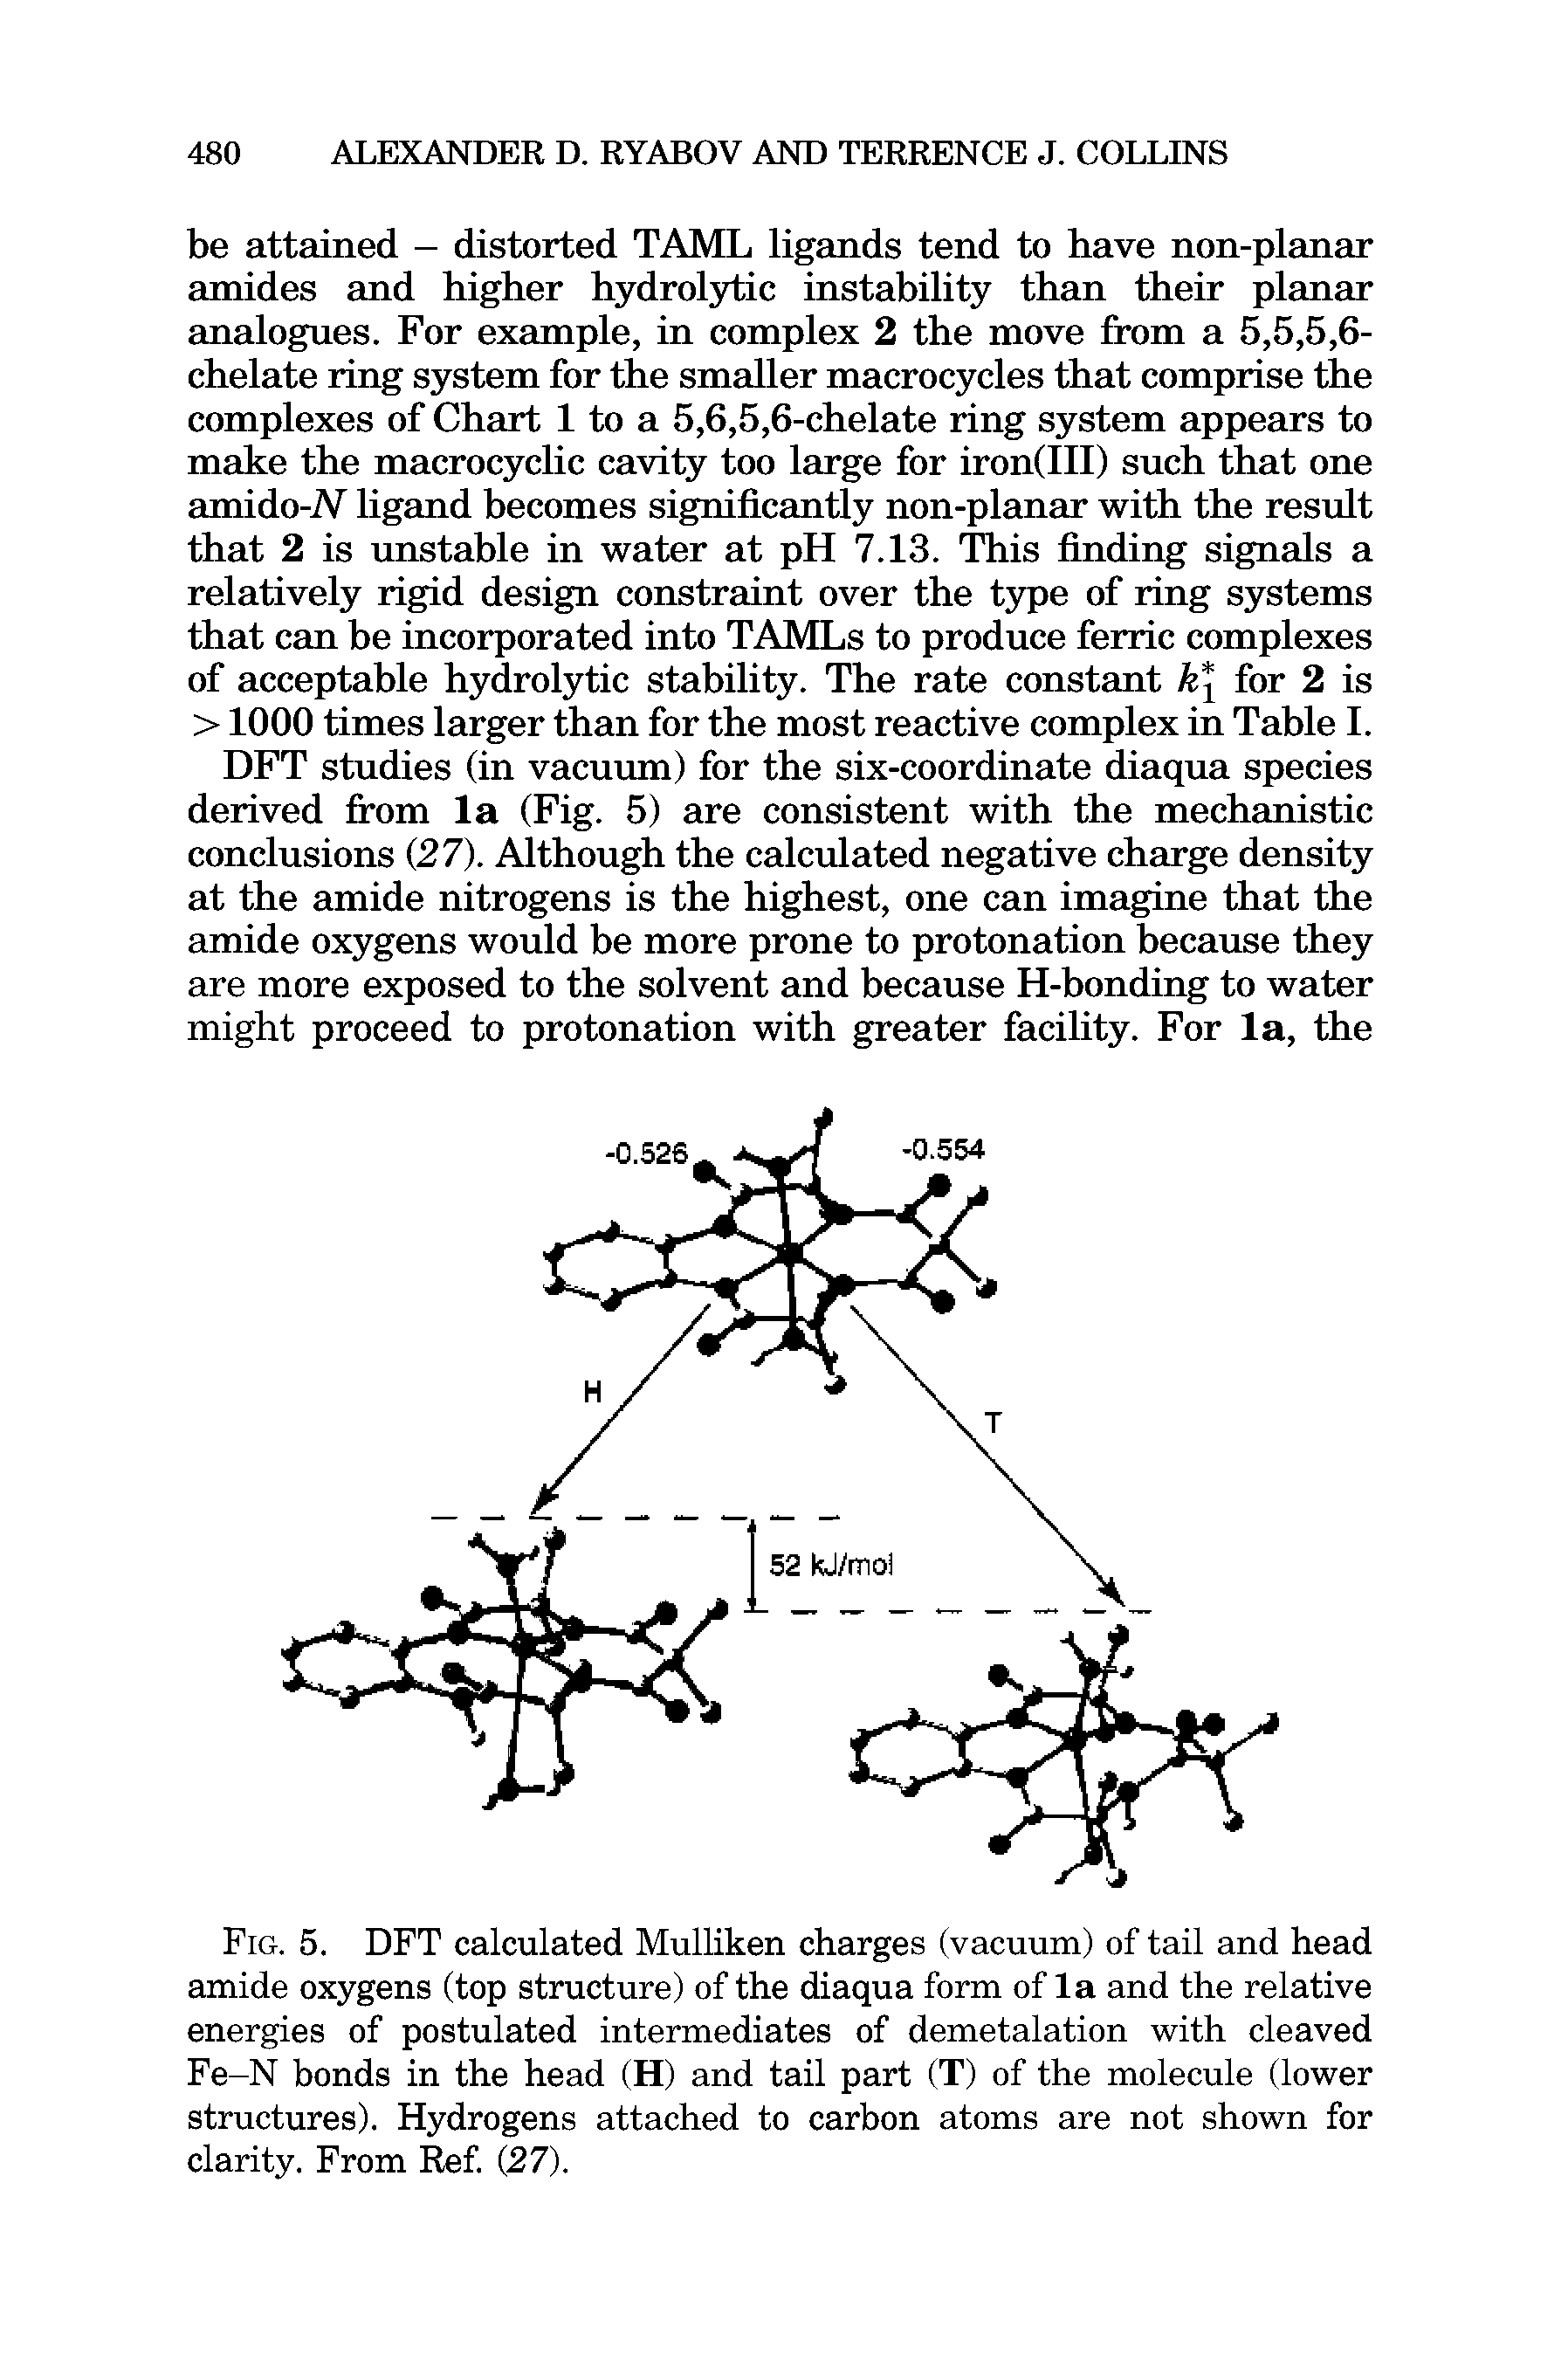 Fig. 5. DFT calculated Mulliken charges (vacuum) of tail and head amide oxygens (top structure) of the diaqua form of la and the relative energies of postulated intermediates of demetalation with cleaved Fe-N bonds in the head (H) and tail part (T) of the molecule (lower structures). Hydrogens attached to carbon atoms are not shown for clarity. From Ref. (27).